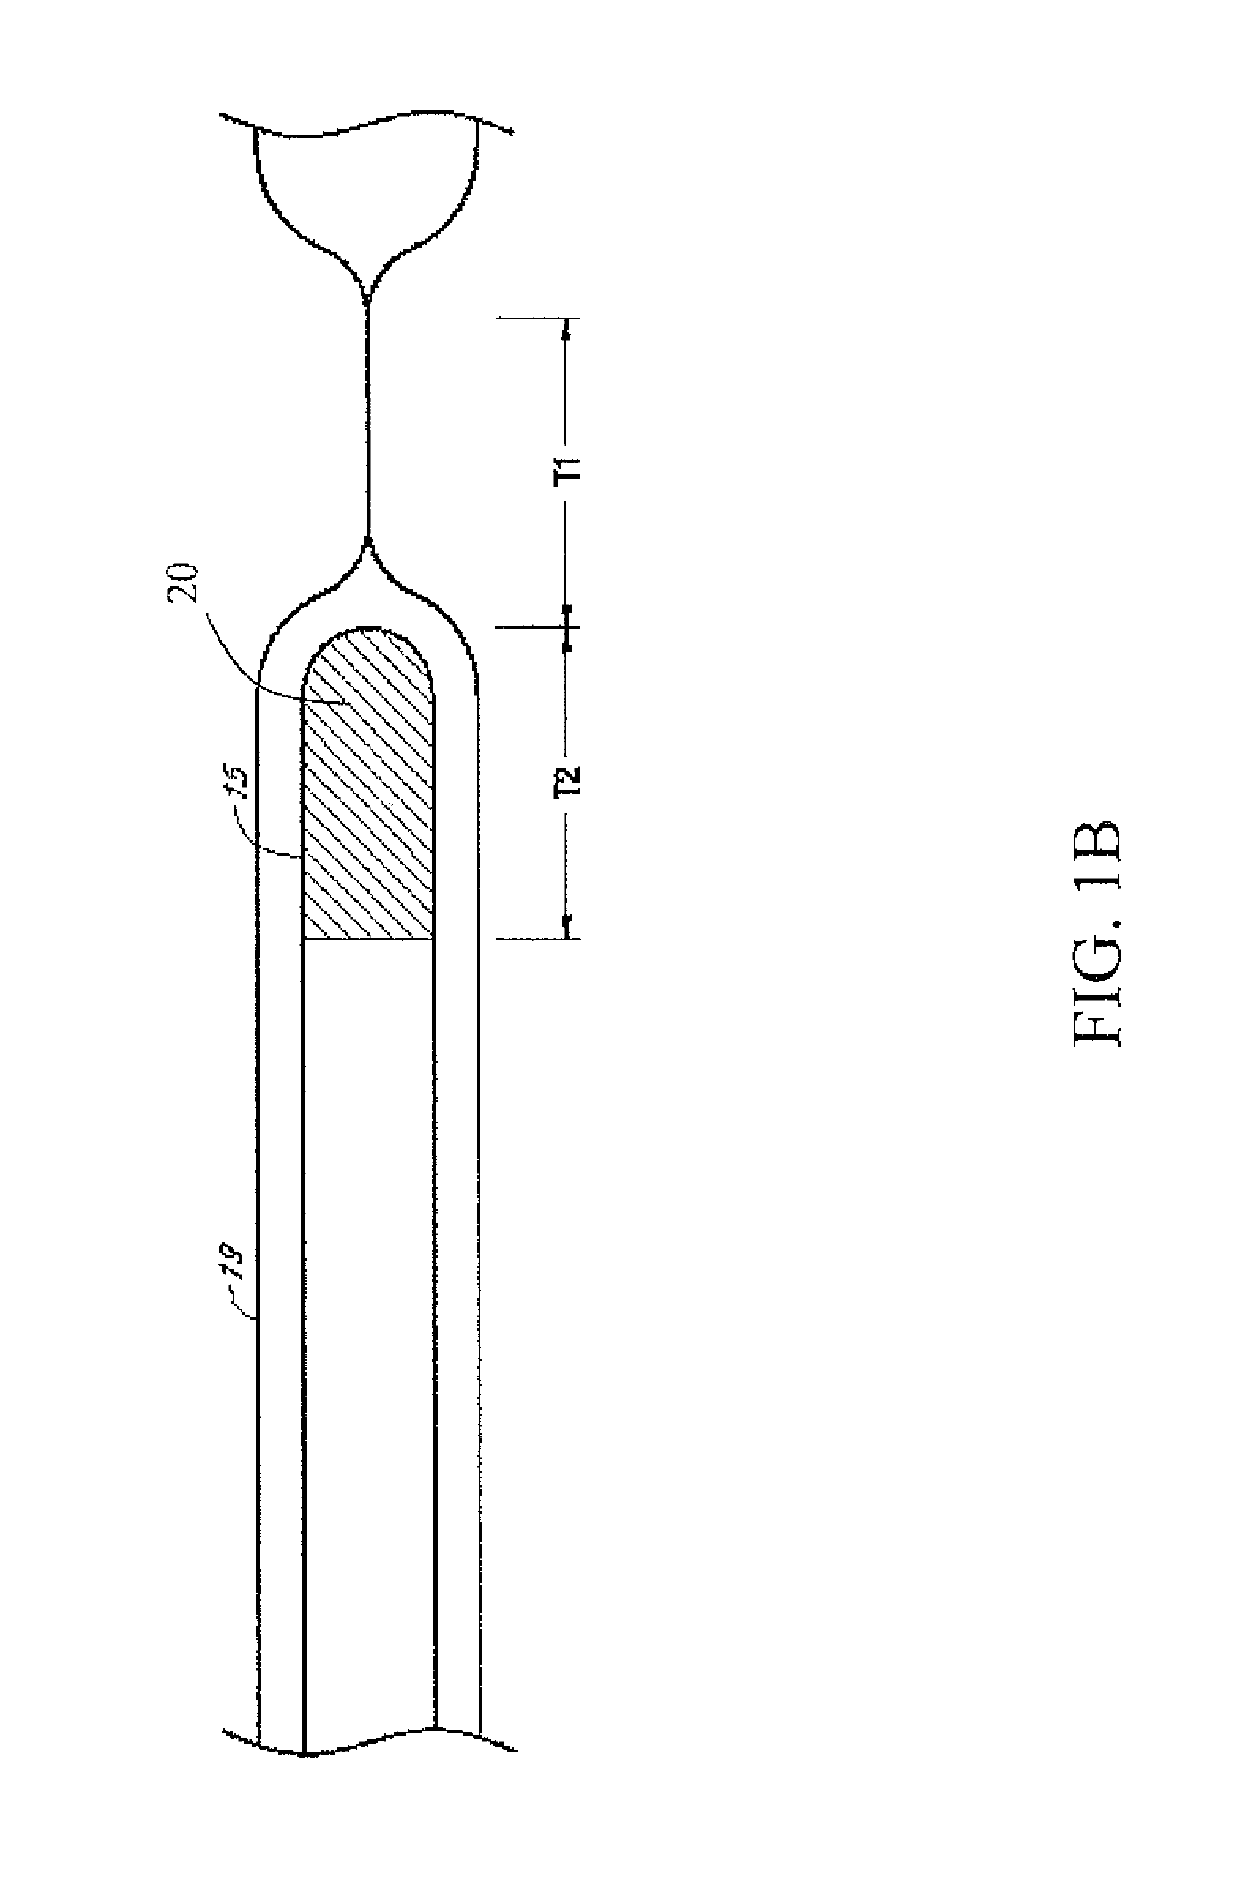 Electrosurgical medical device with power modulation